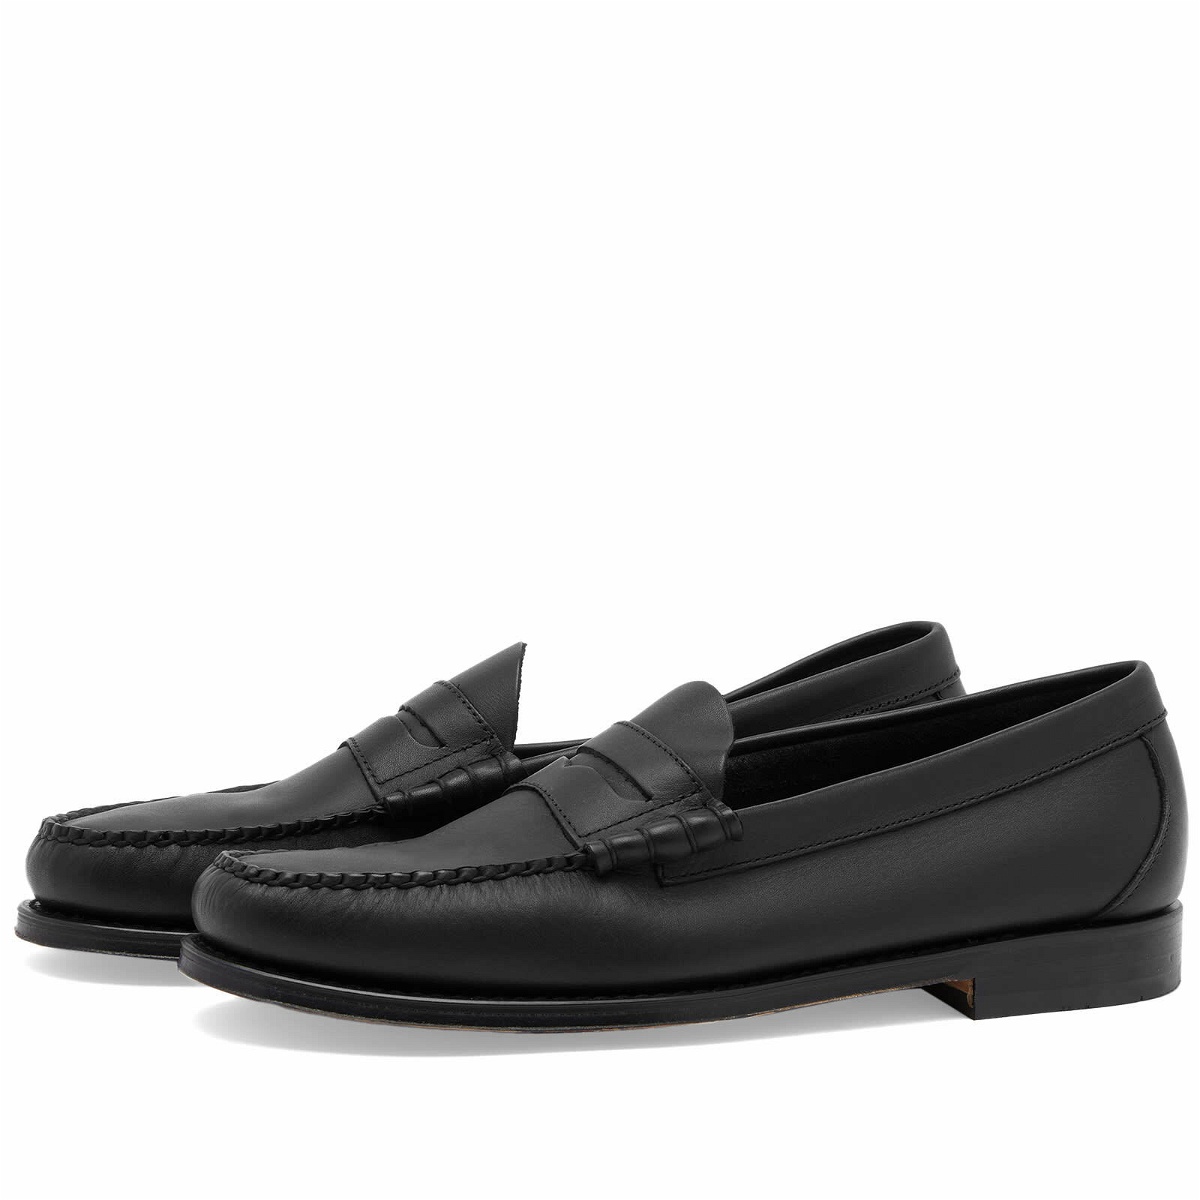 Bass Weejuns Men's Larson Soft Penny Loafer in Black Leather Bass Weejuns